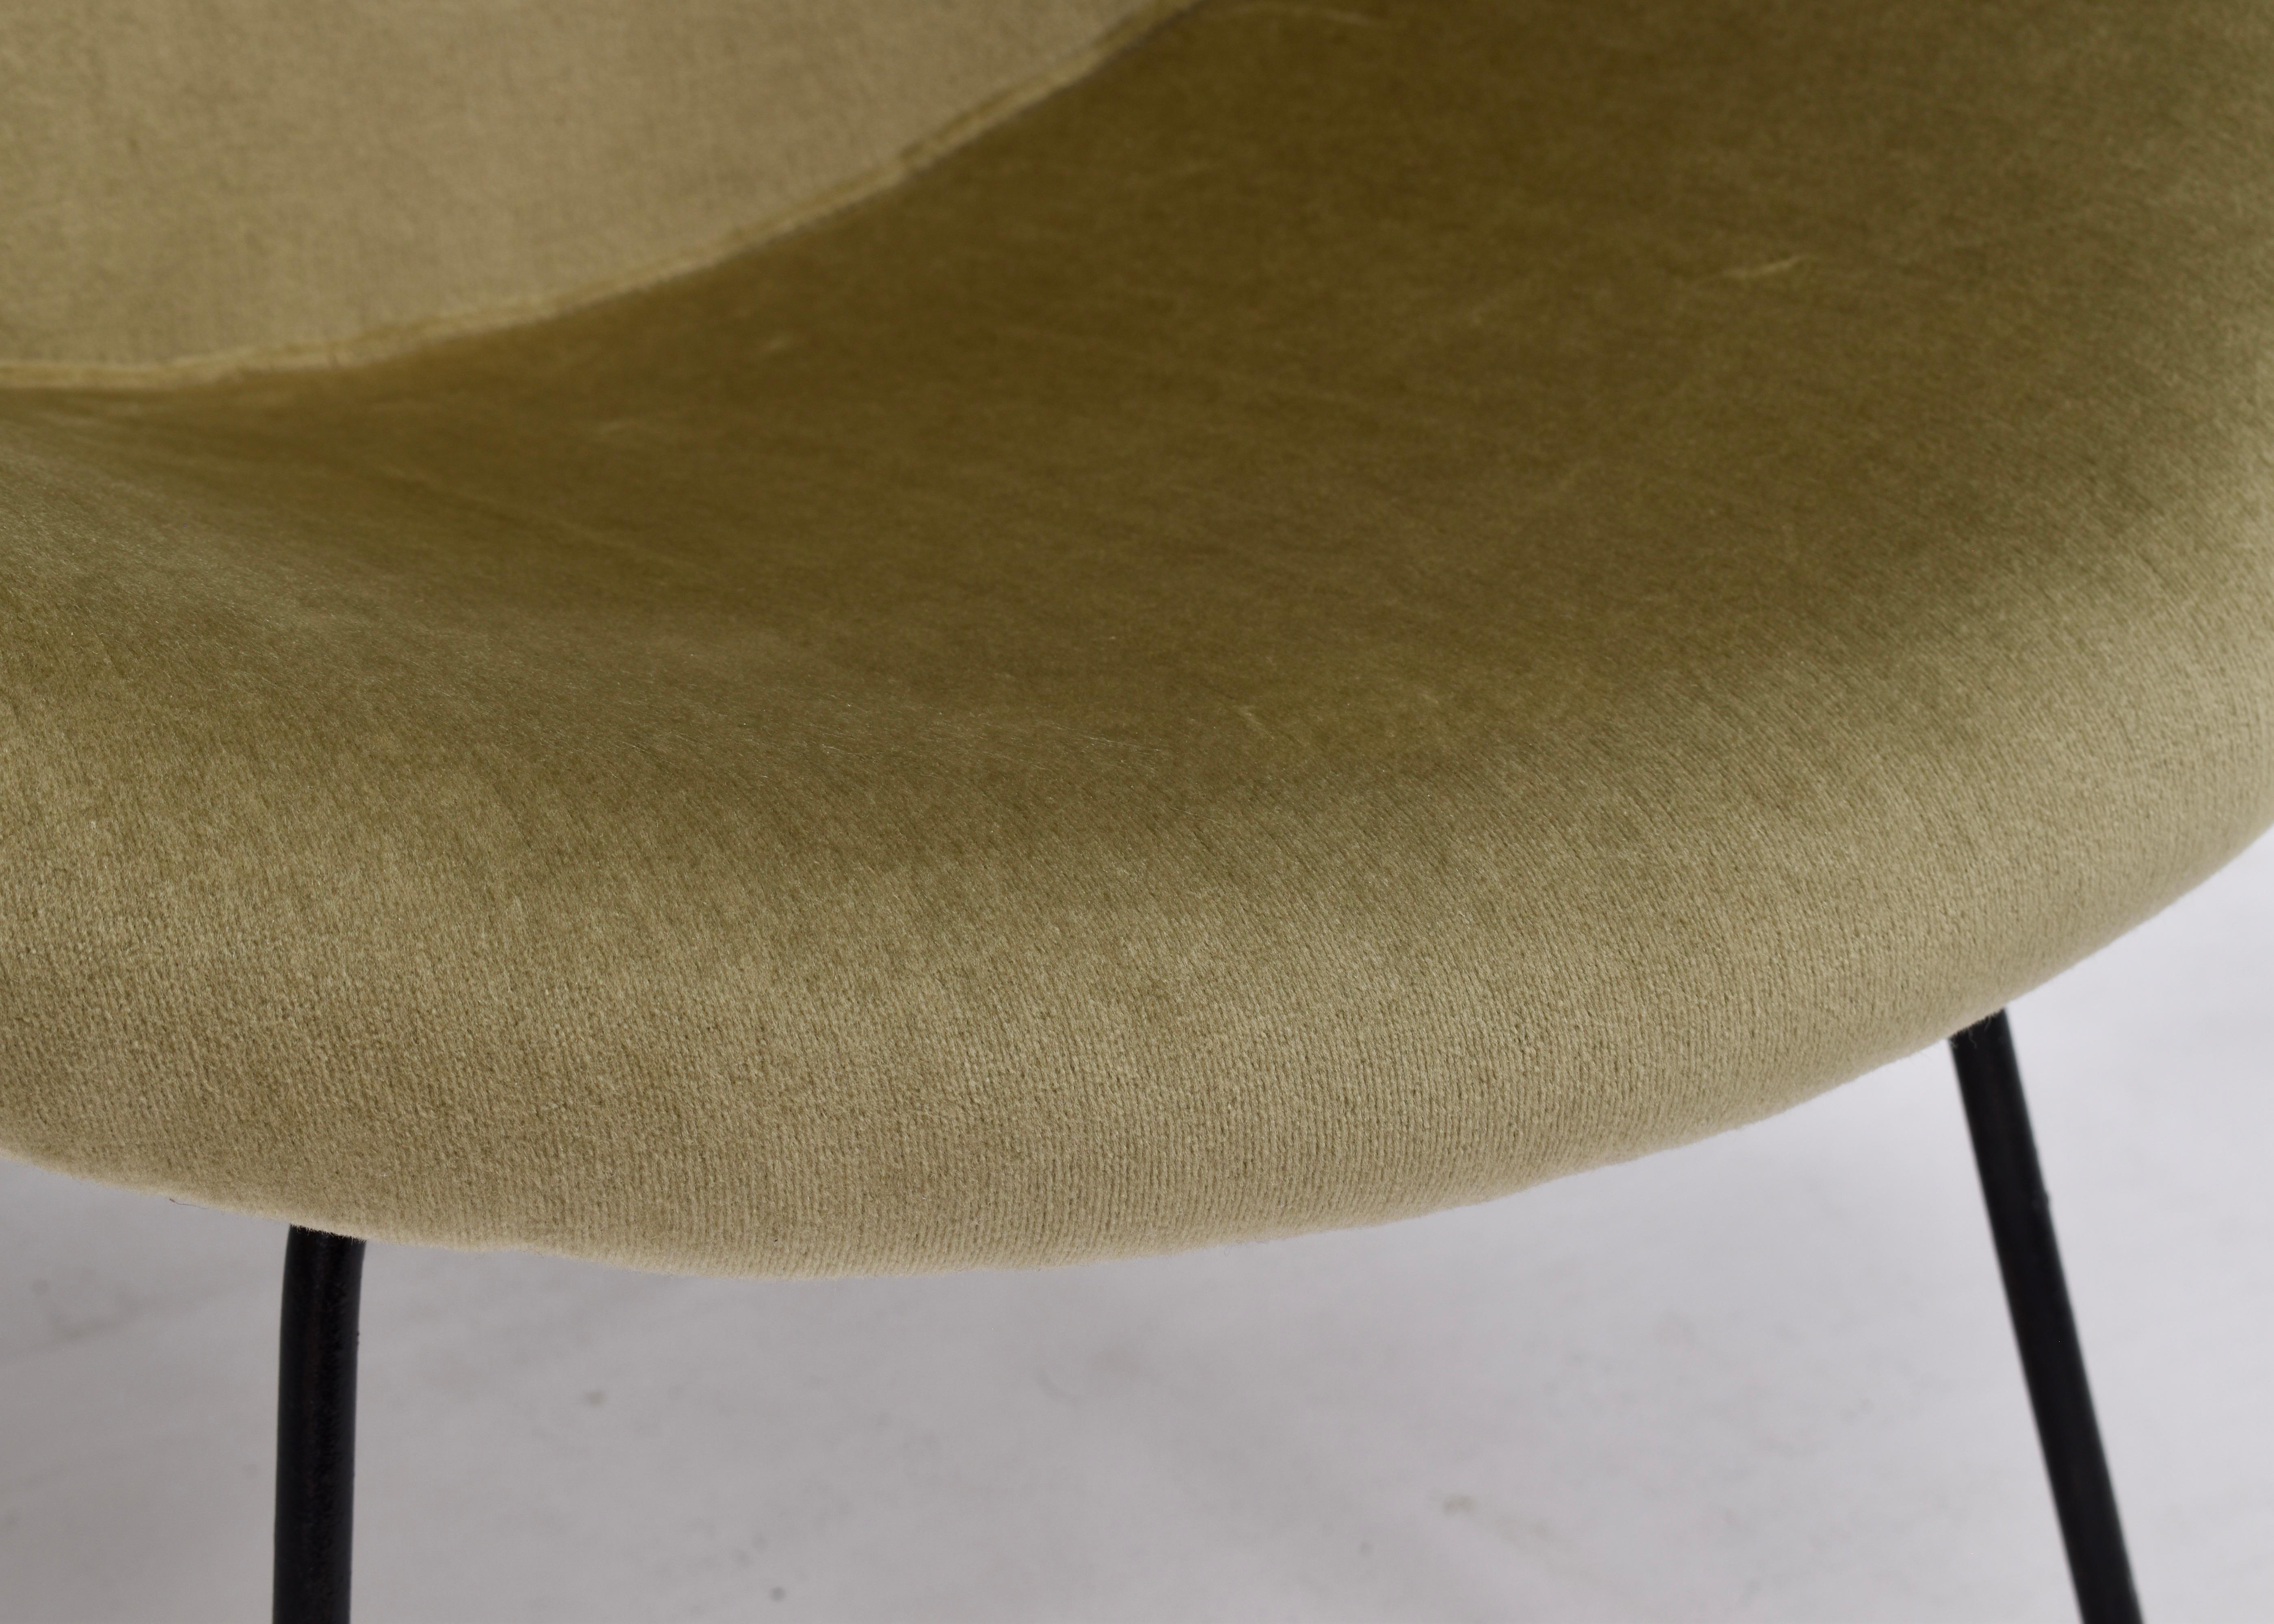 Sculptural Circle Chair in Original Mohair Velvet and Black Metal Base, 1950's For Sale 4